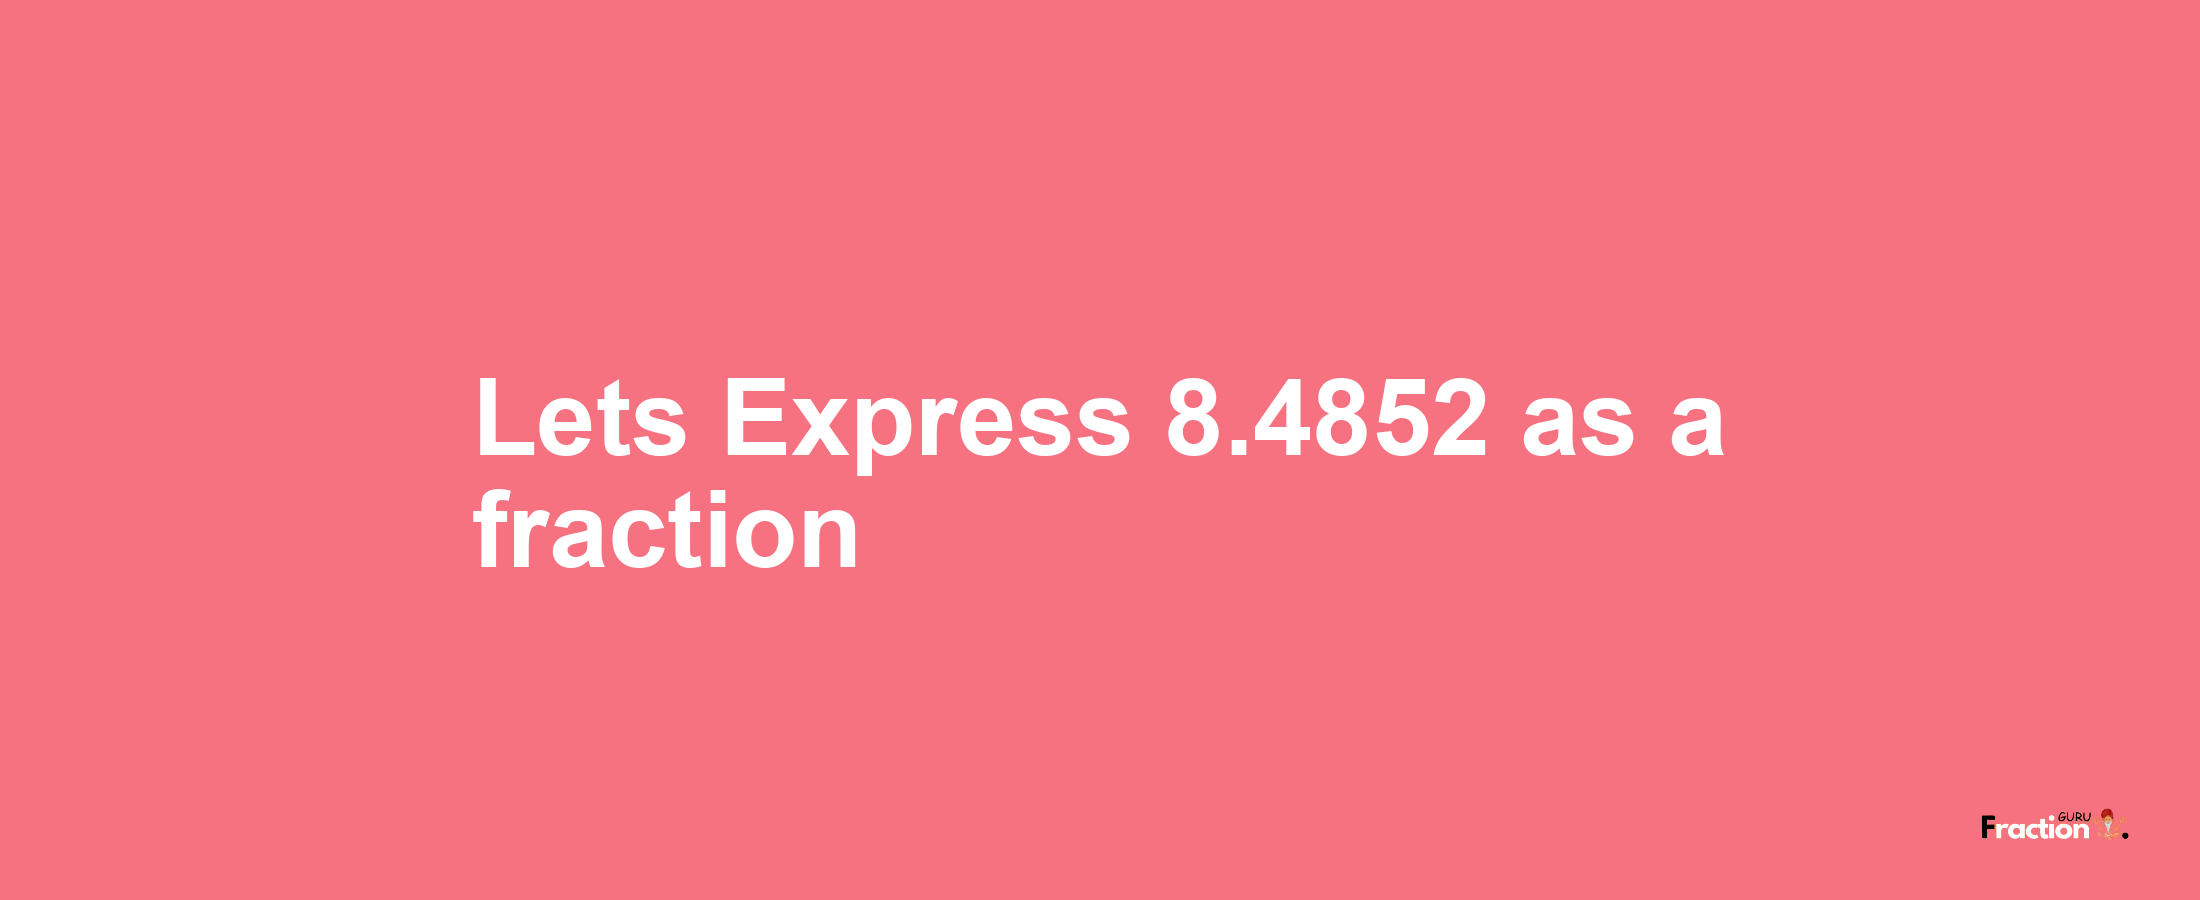 Lets Express 8.4852 as afraction